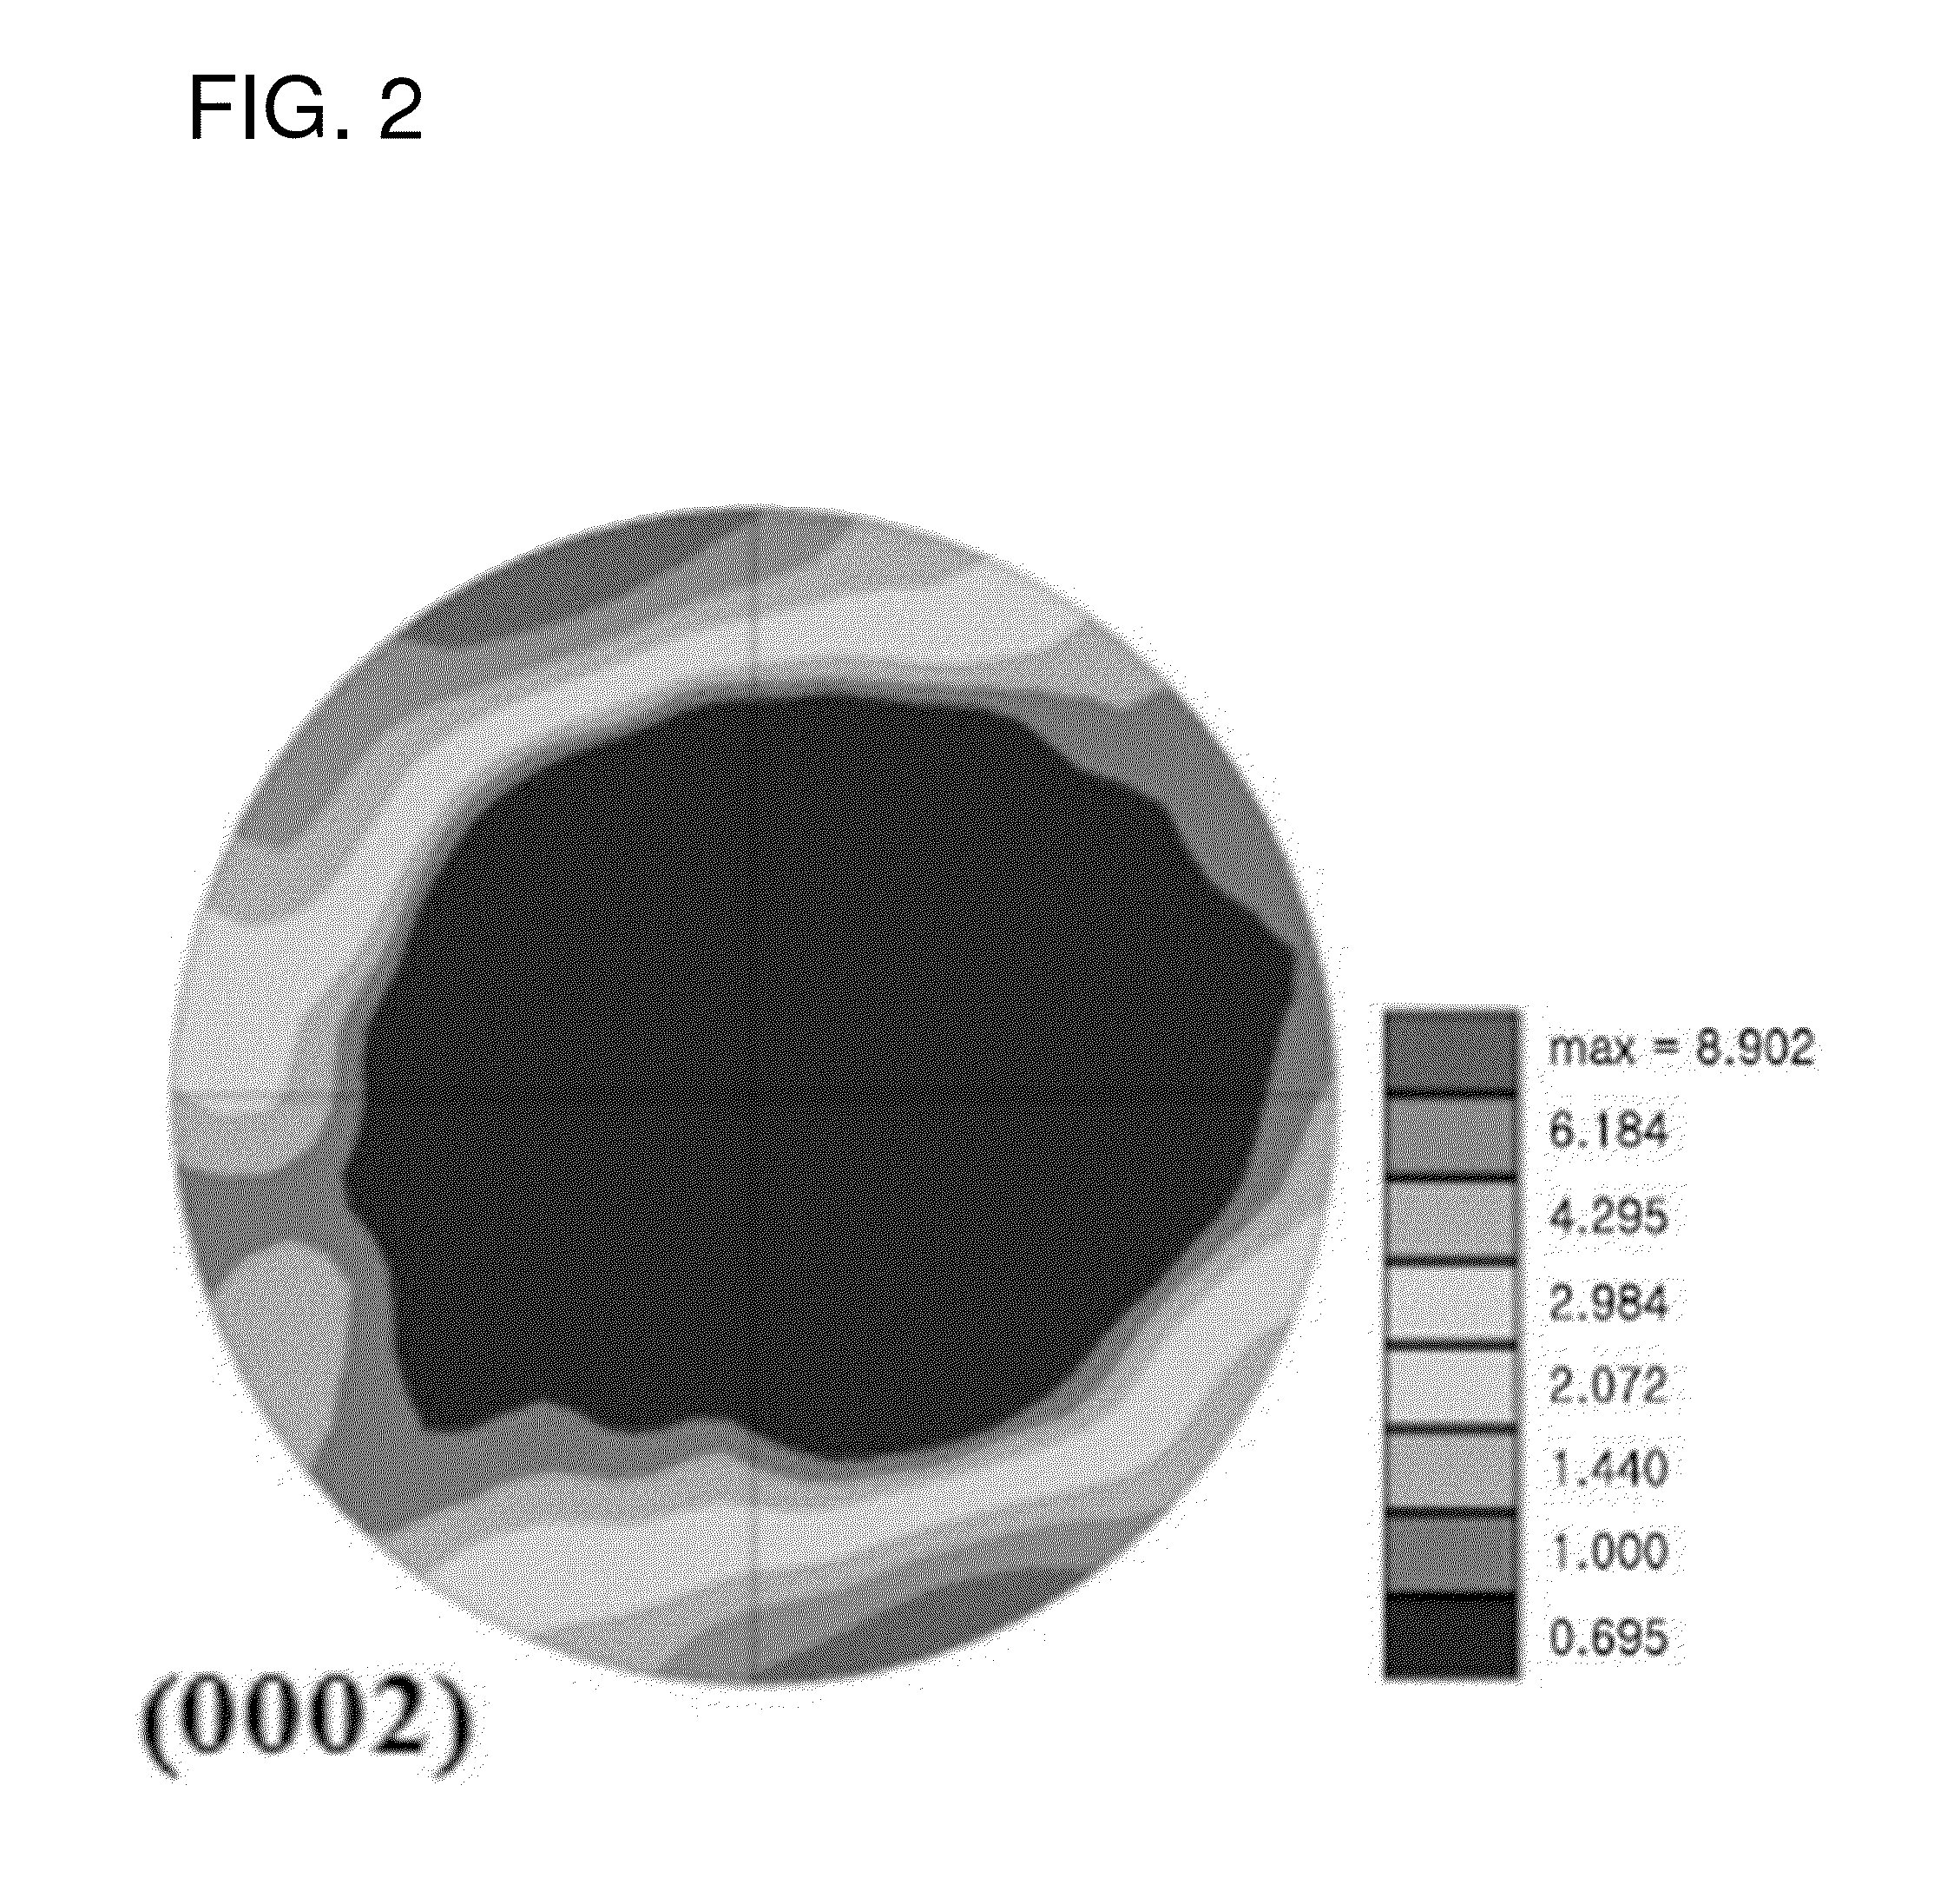 Magnesium alloy having high ductility and high toughness, and preparation method thereof